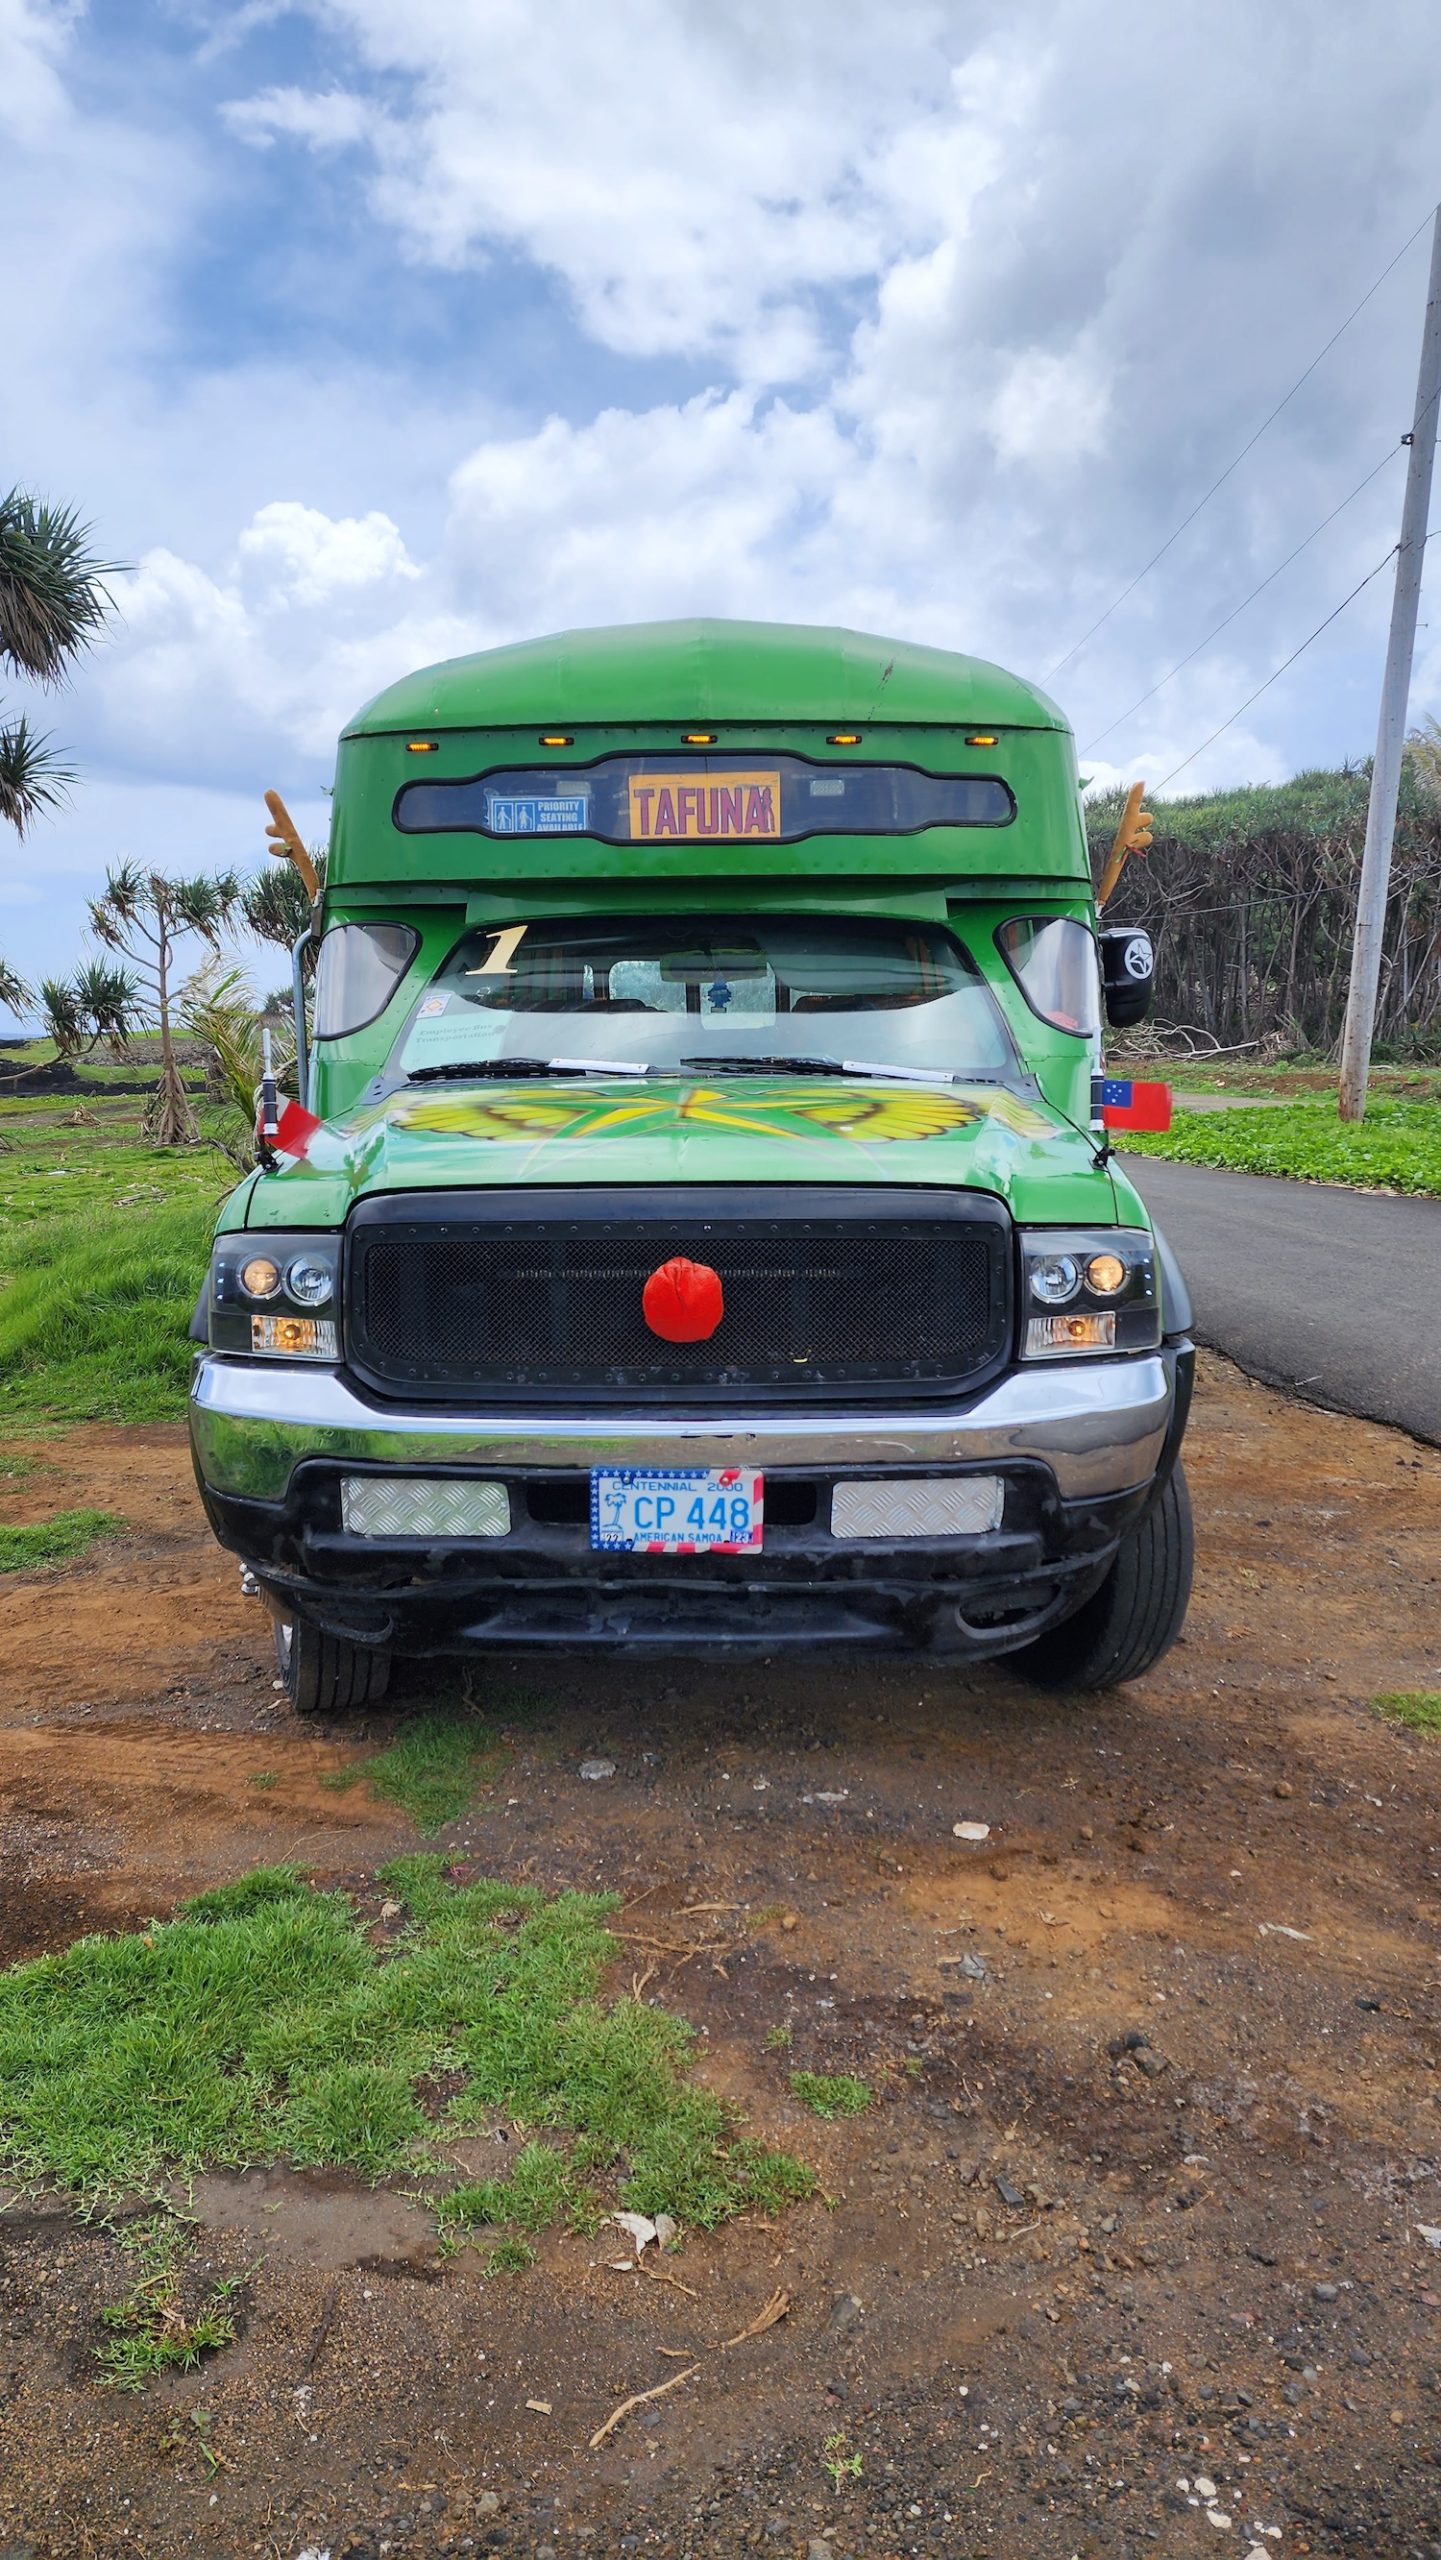 a green truck parked on a dirt road